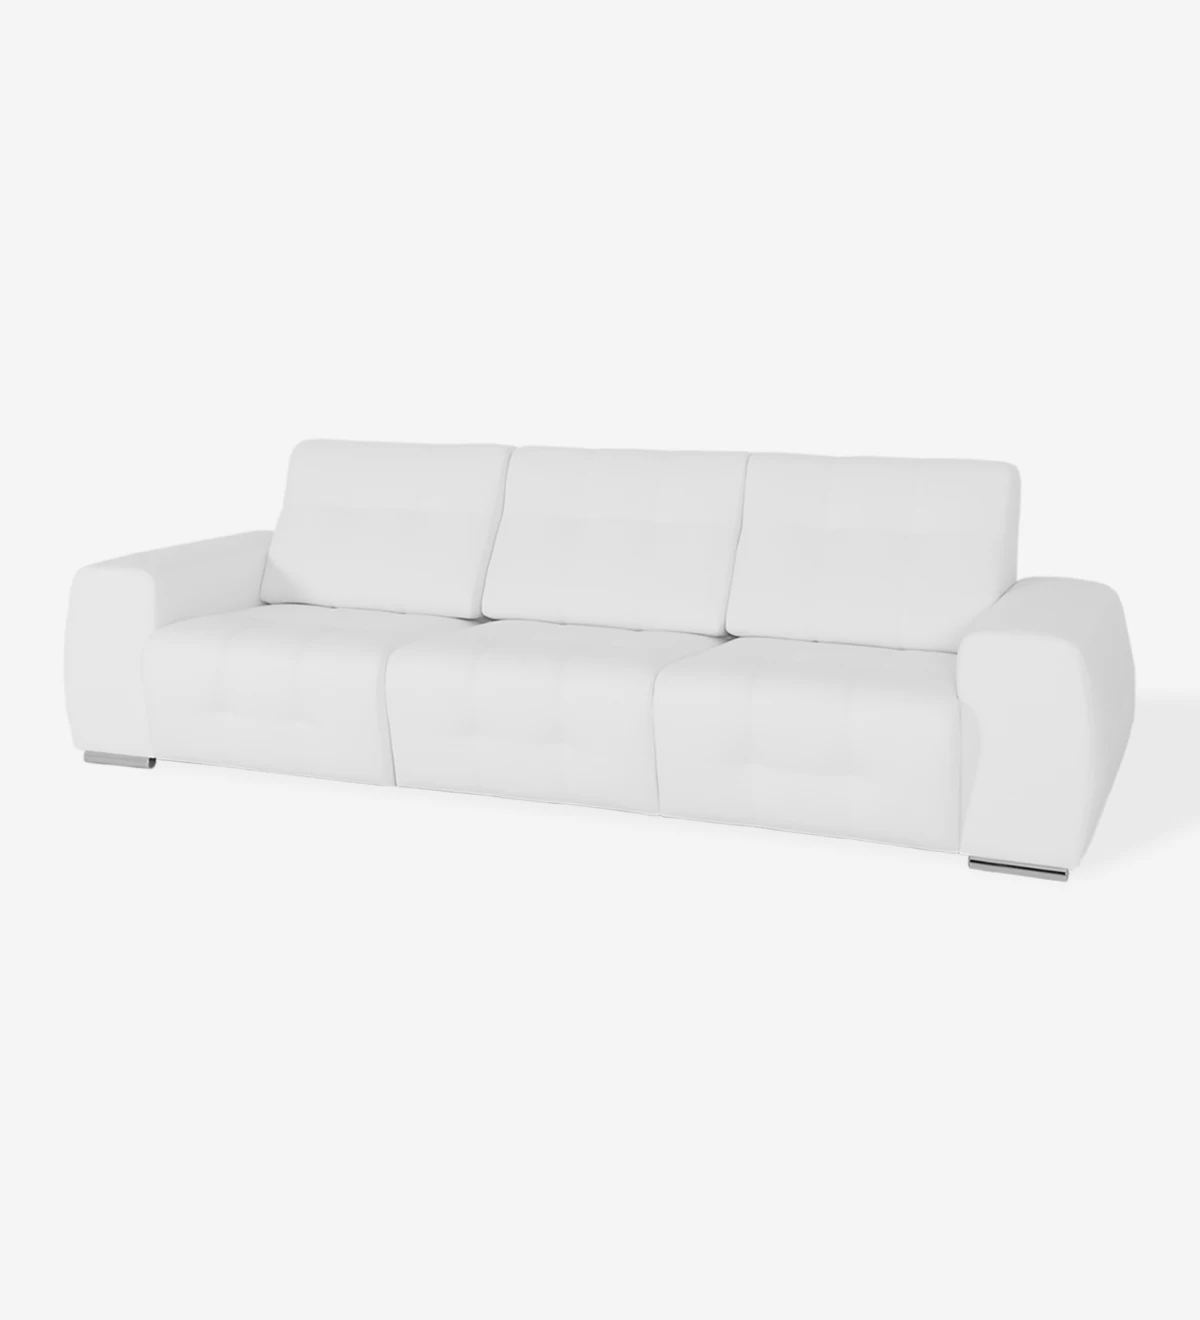 3 seater, upholstered in white eco-leather, with chrome legs.